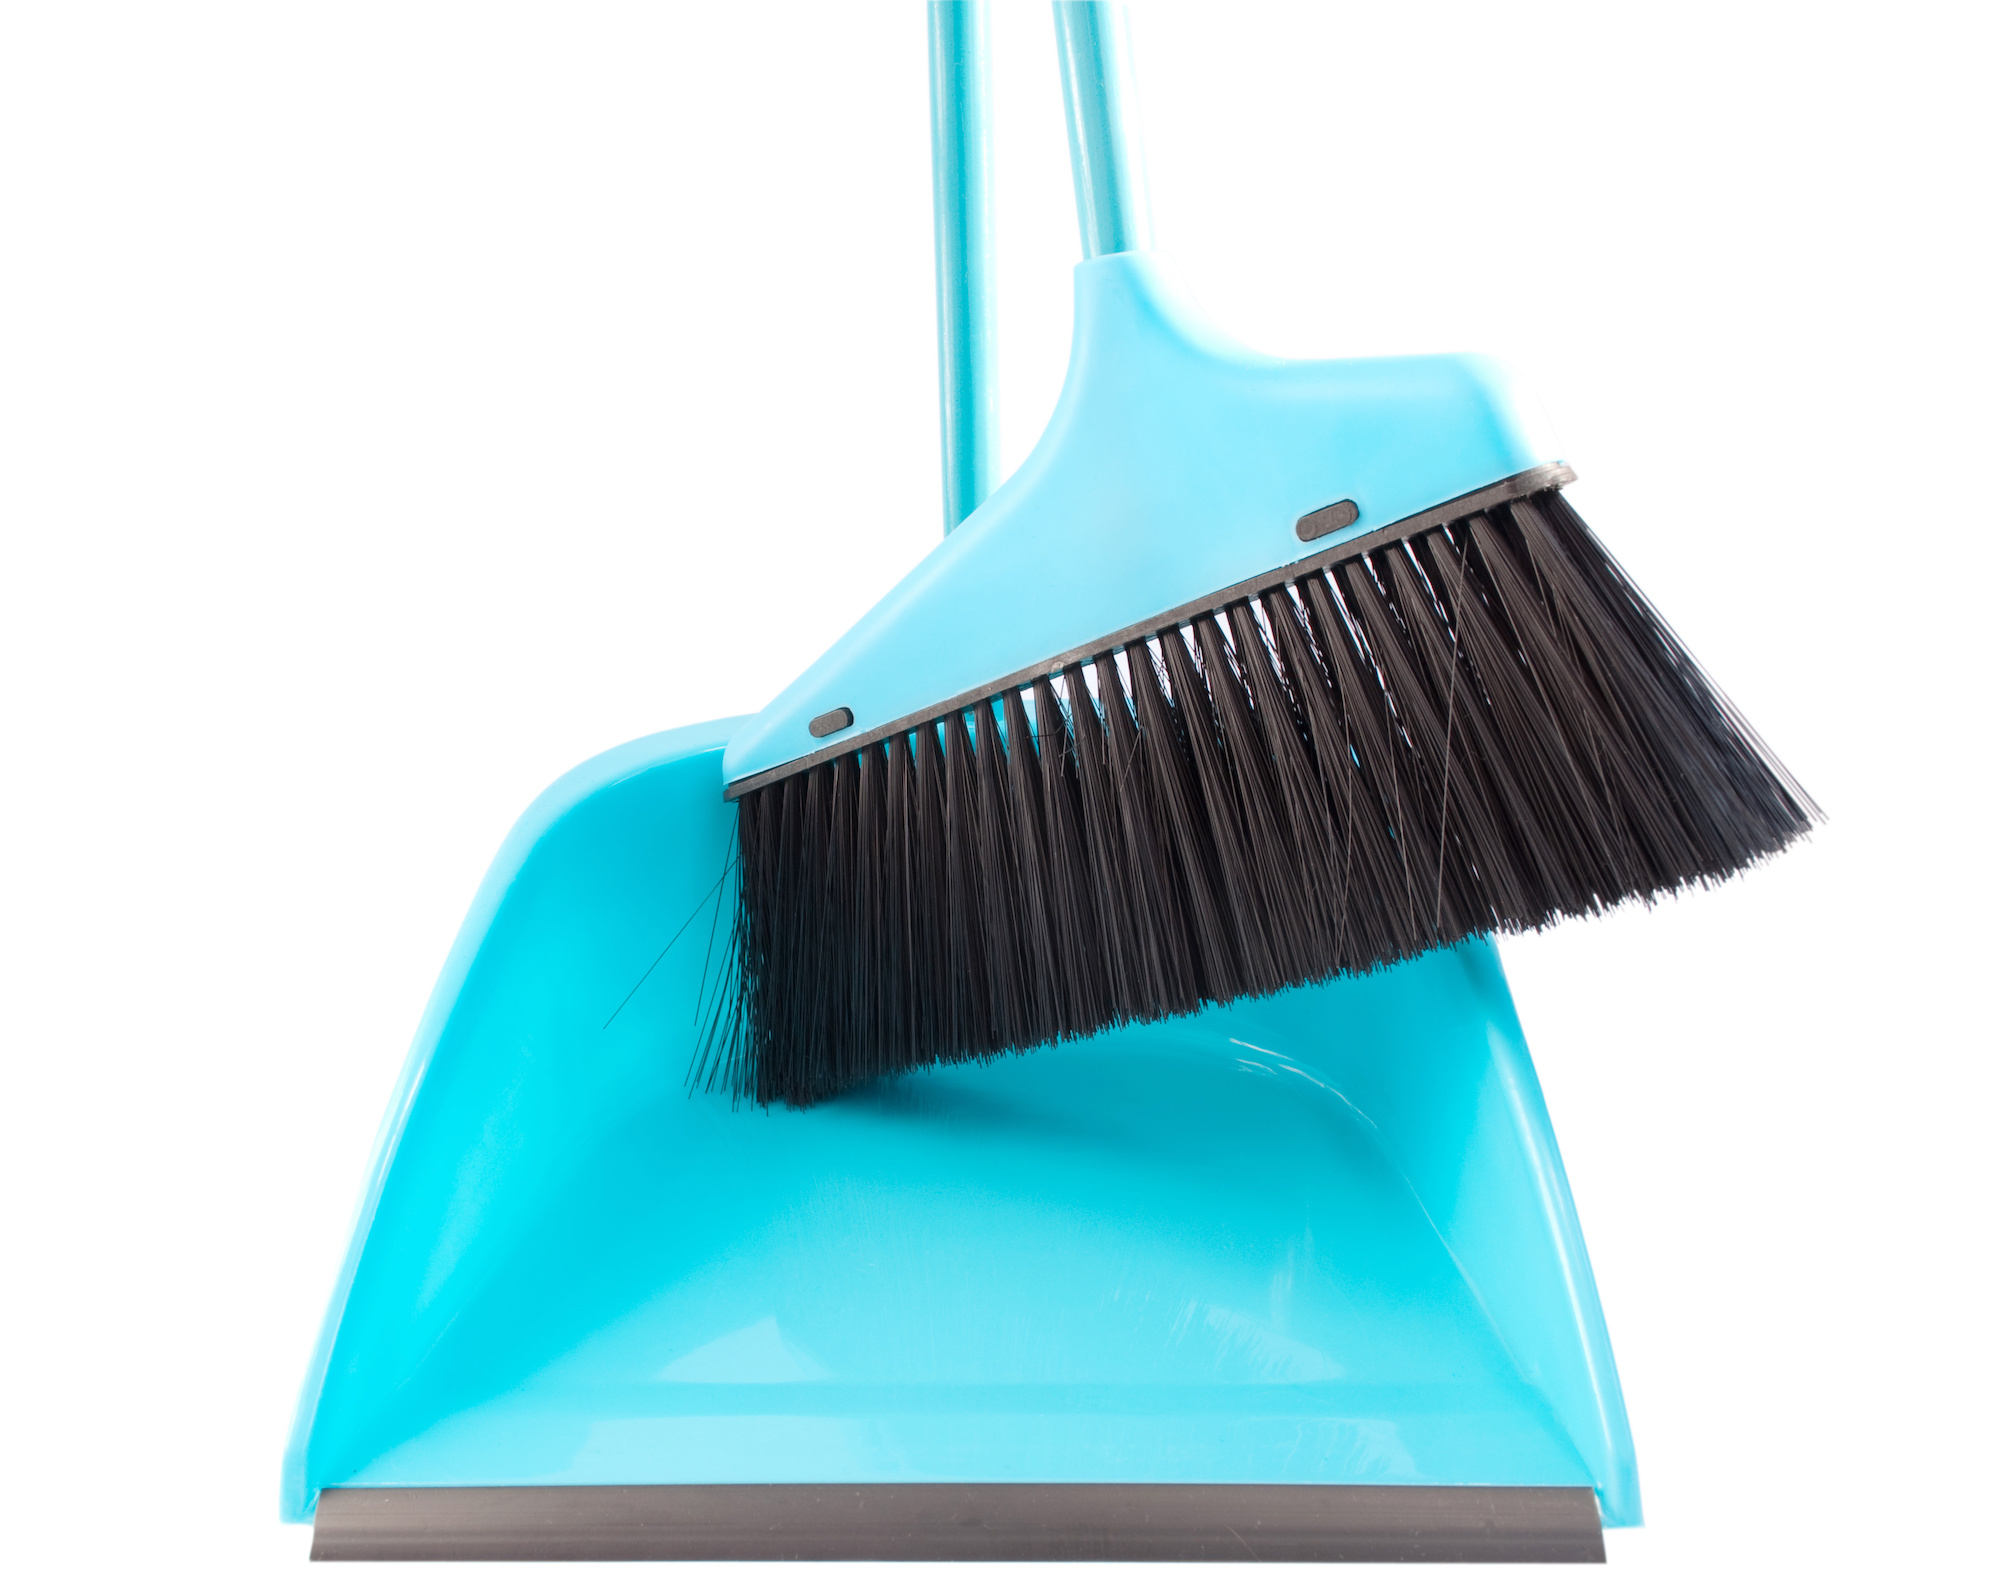 Turquoise broom and dustpan.